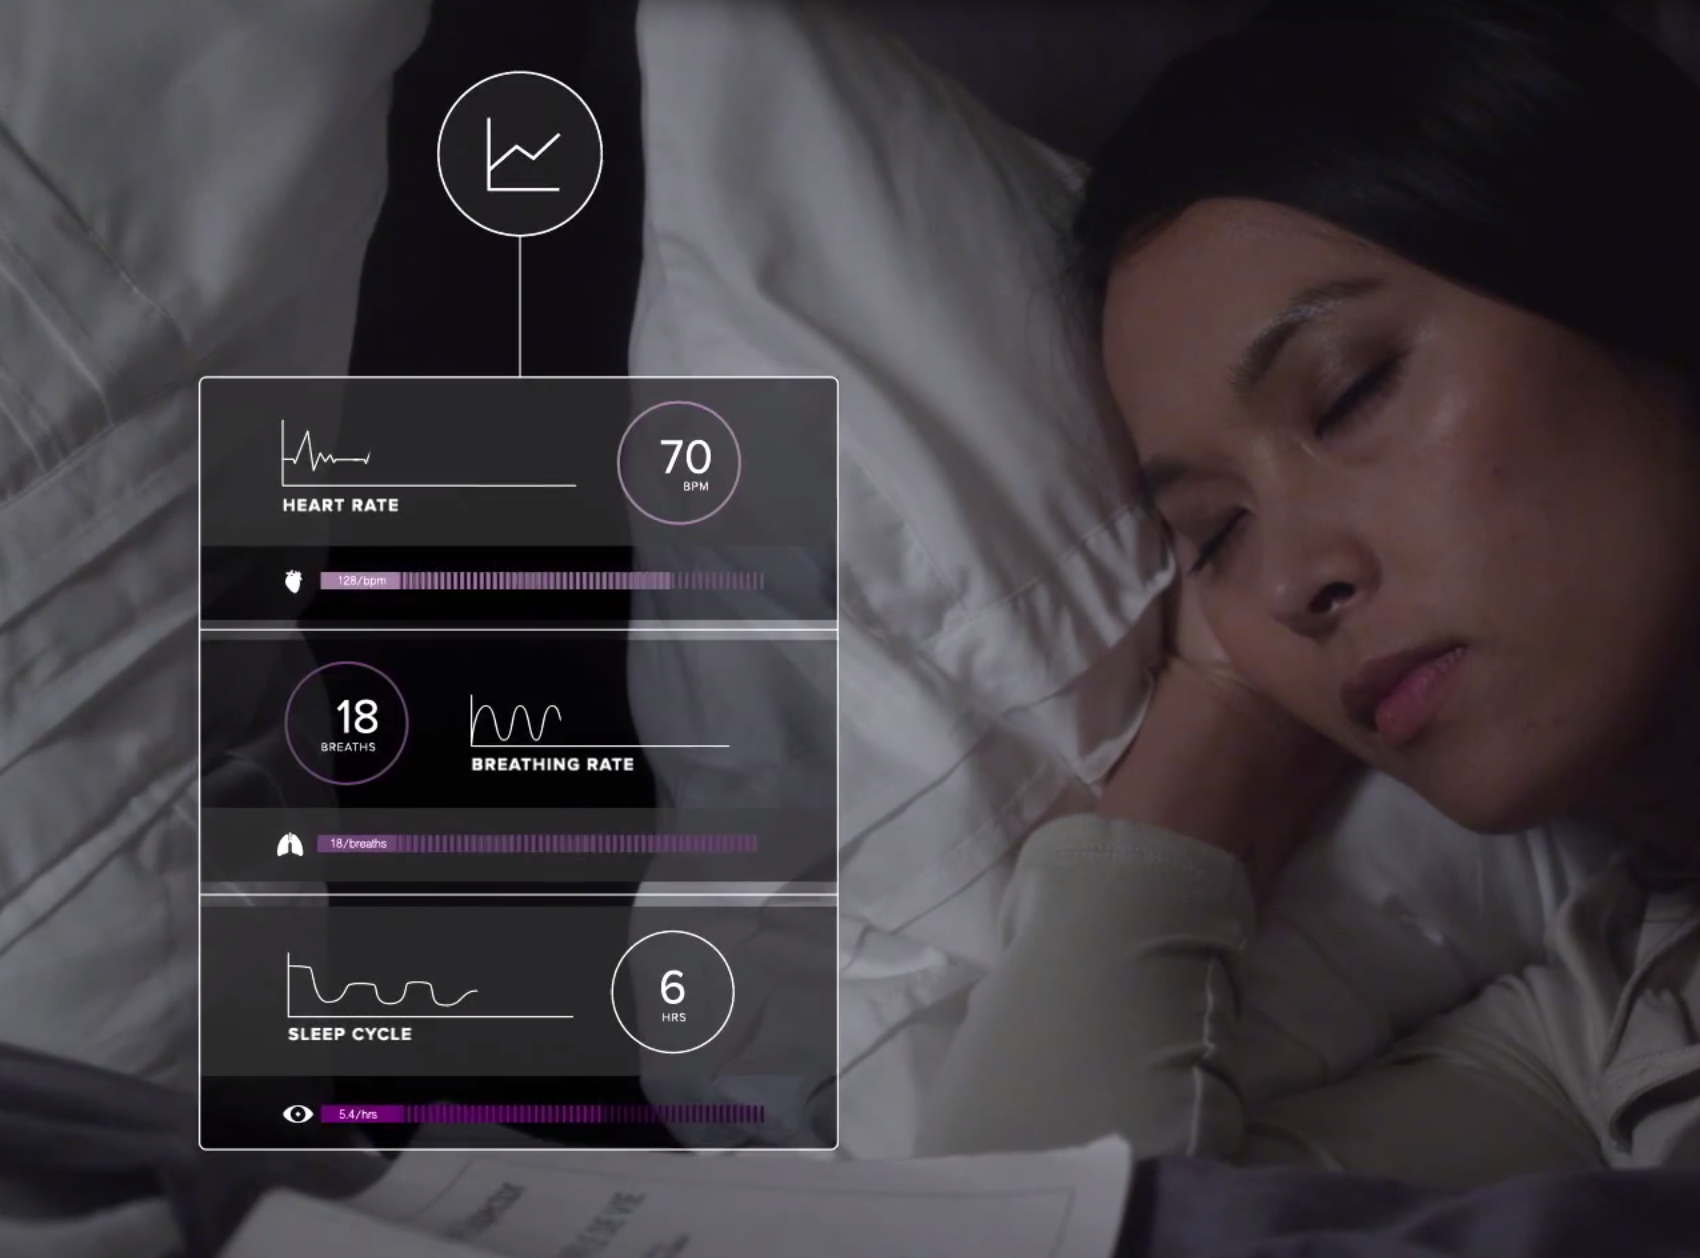 luna mattress cover tracks your sleep and controls your smarthome at night image 1